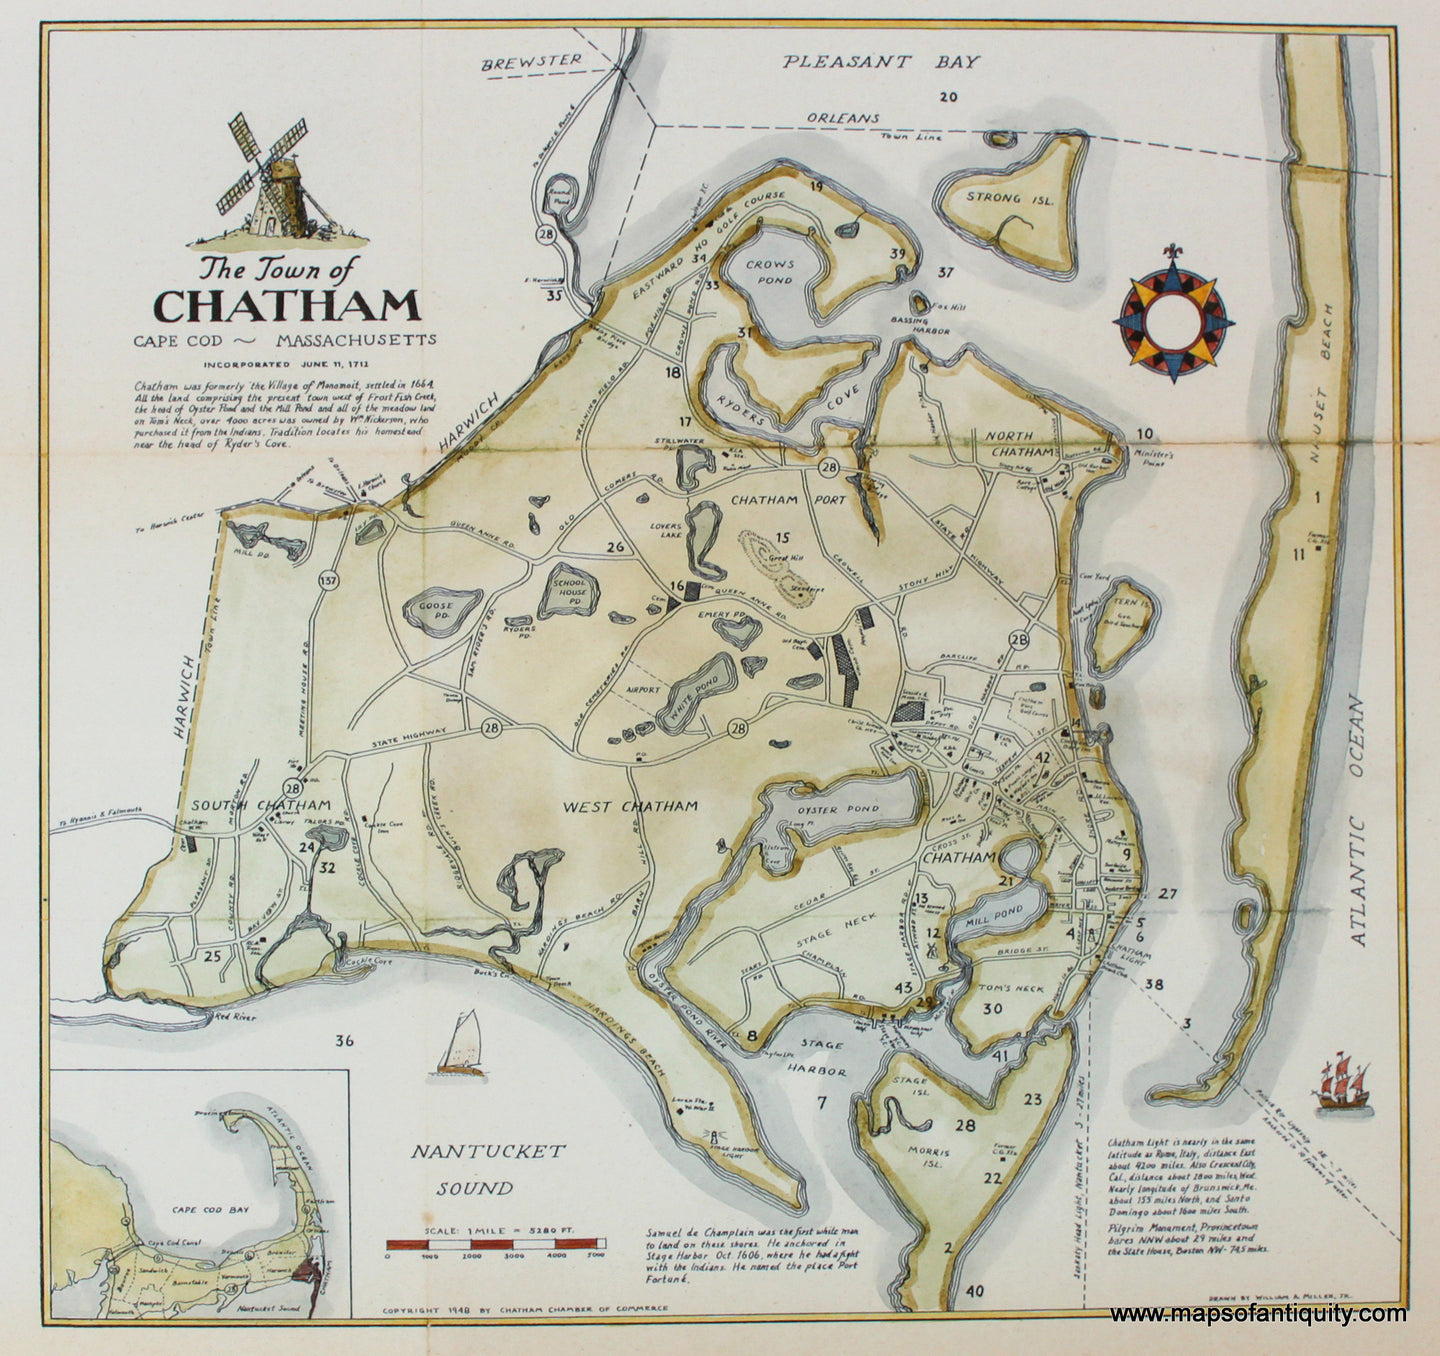 Reproduction-Map-The-Town-of-Chatham-Cape-Cod-Massachusetts